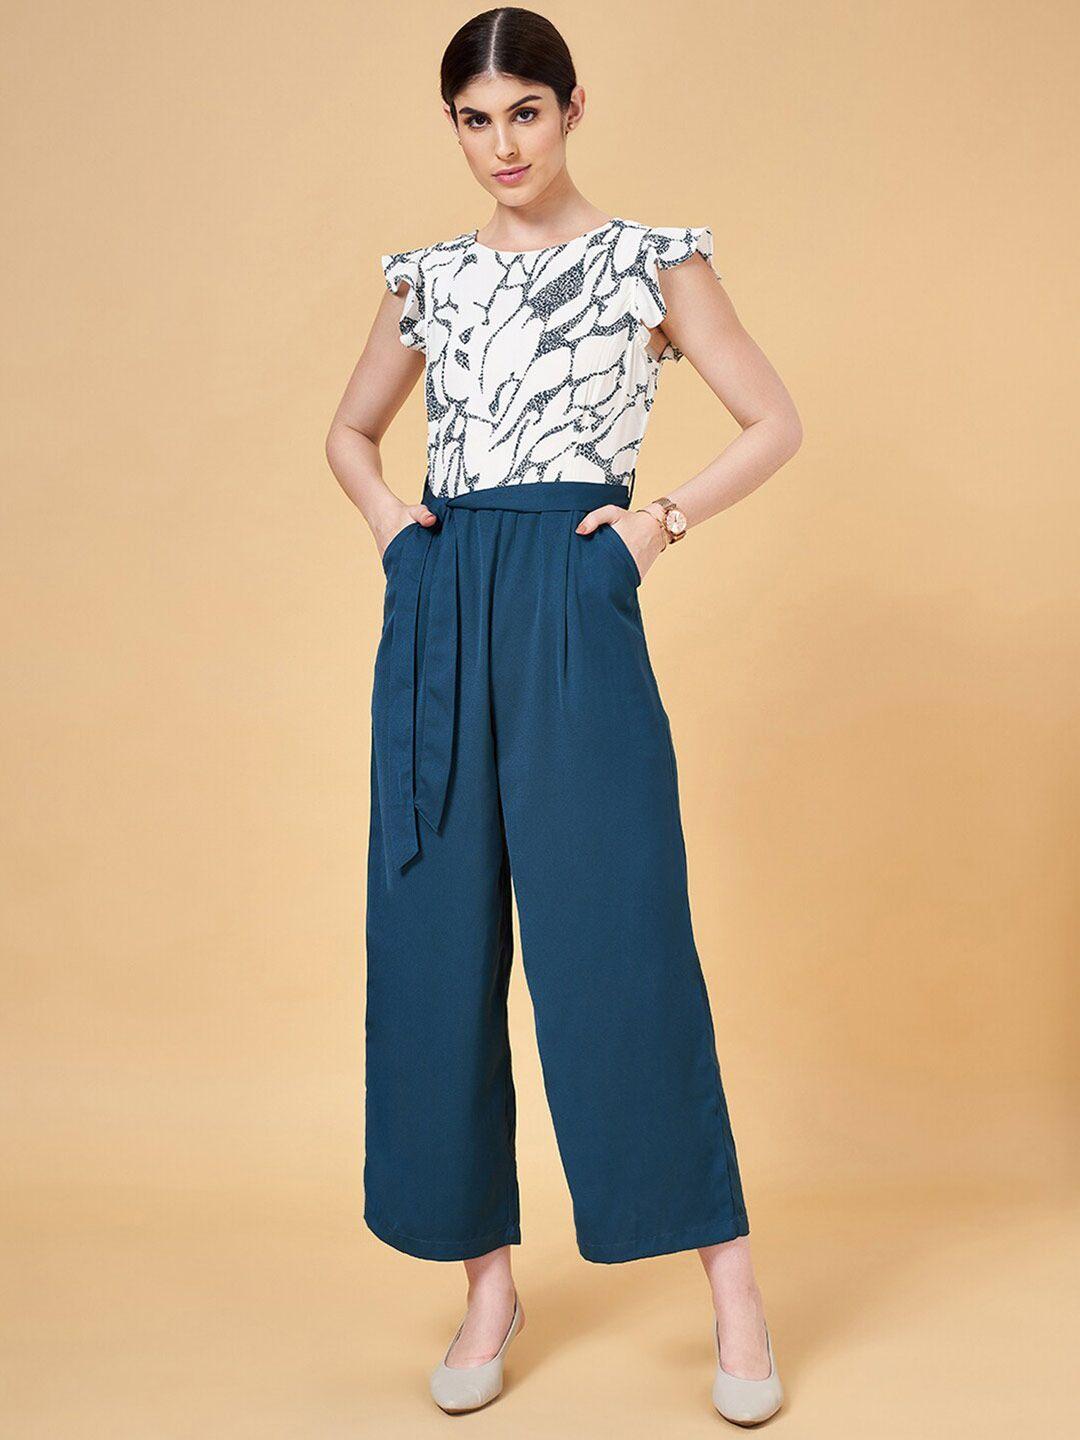 annabelle by pantaloons abstract printed flutter sleeve basic jumpsuit